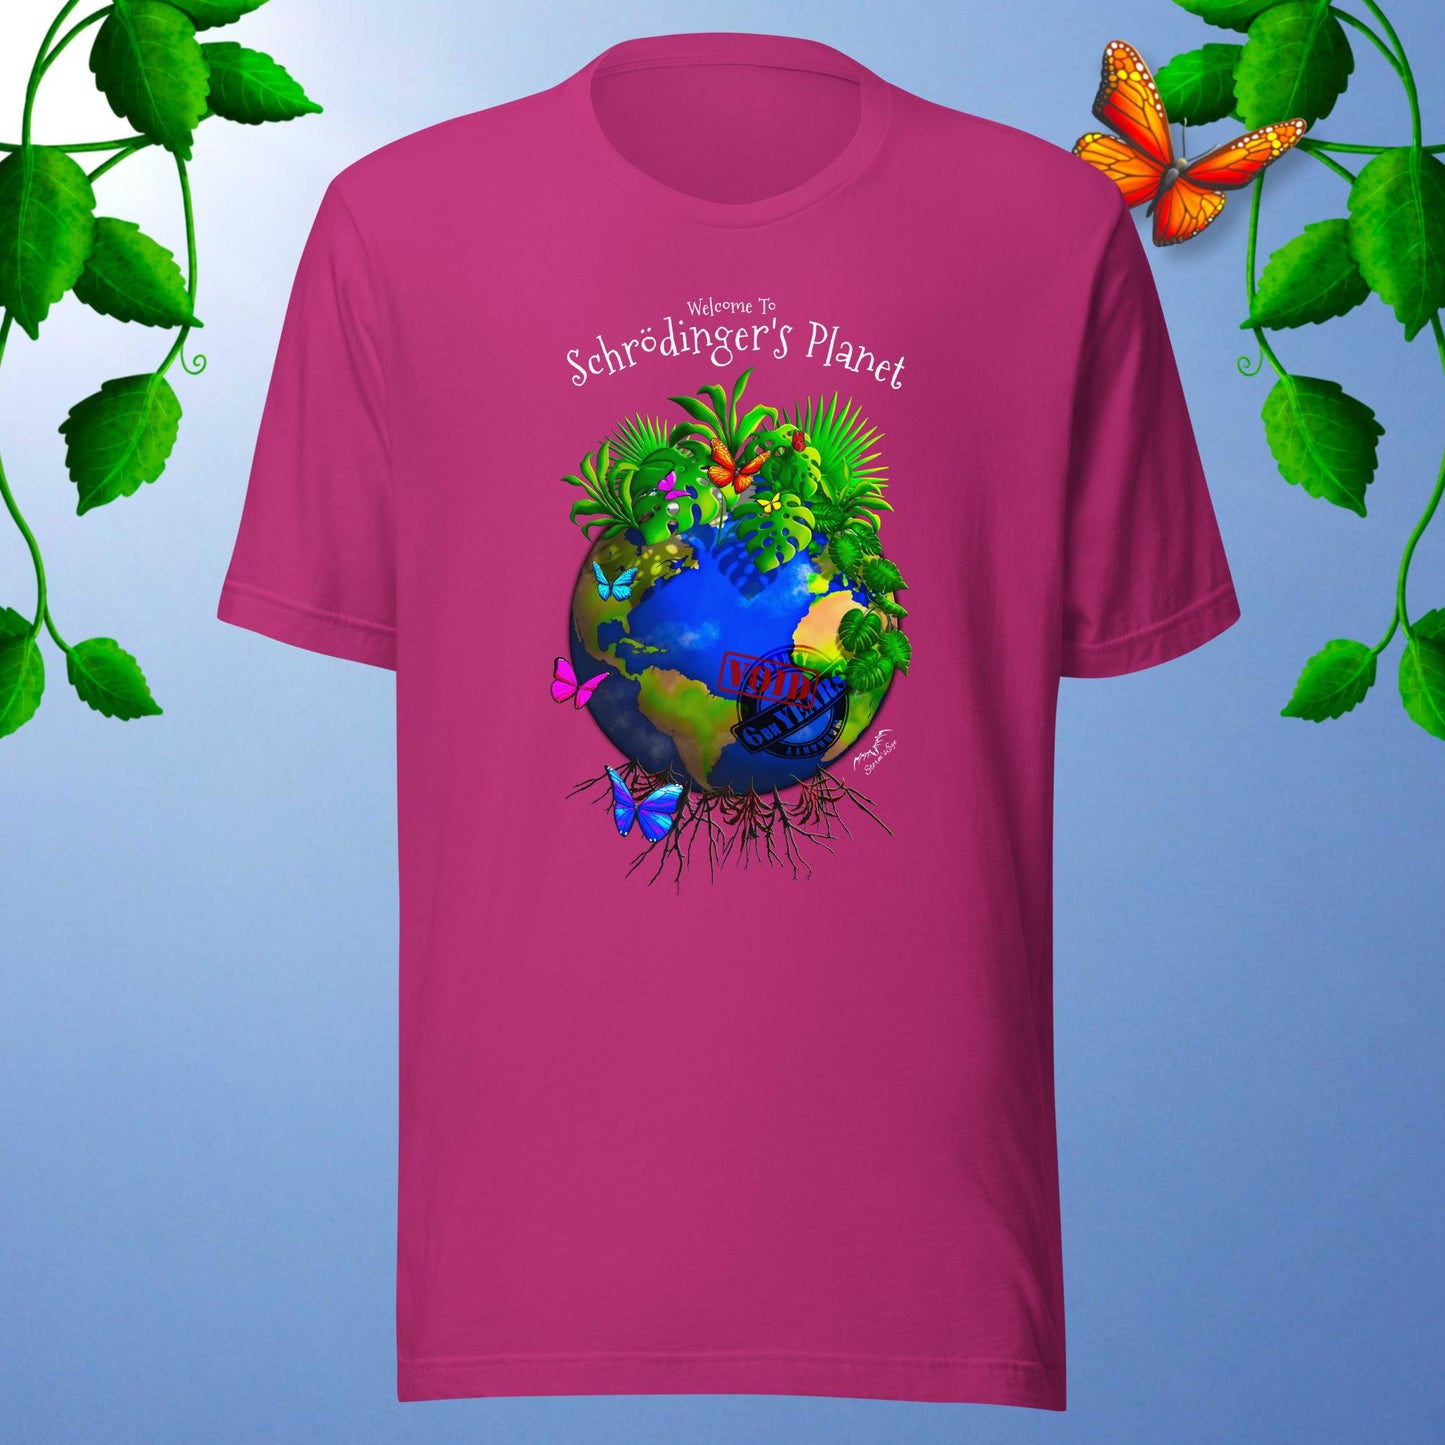 Climate Change Green Planet T-shirt pink by stormseye design